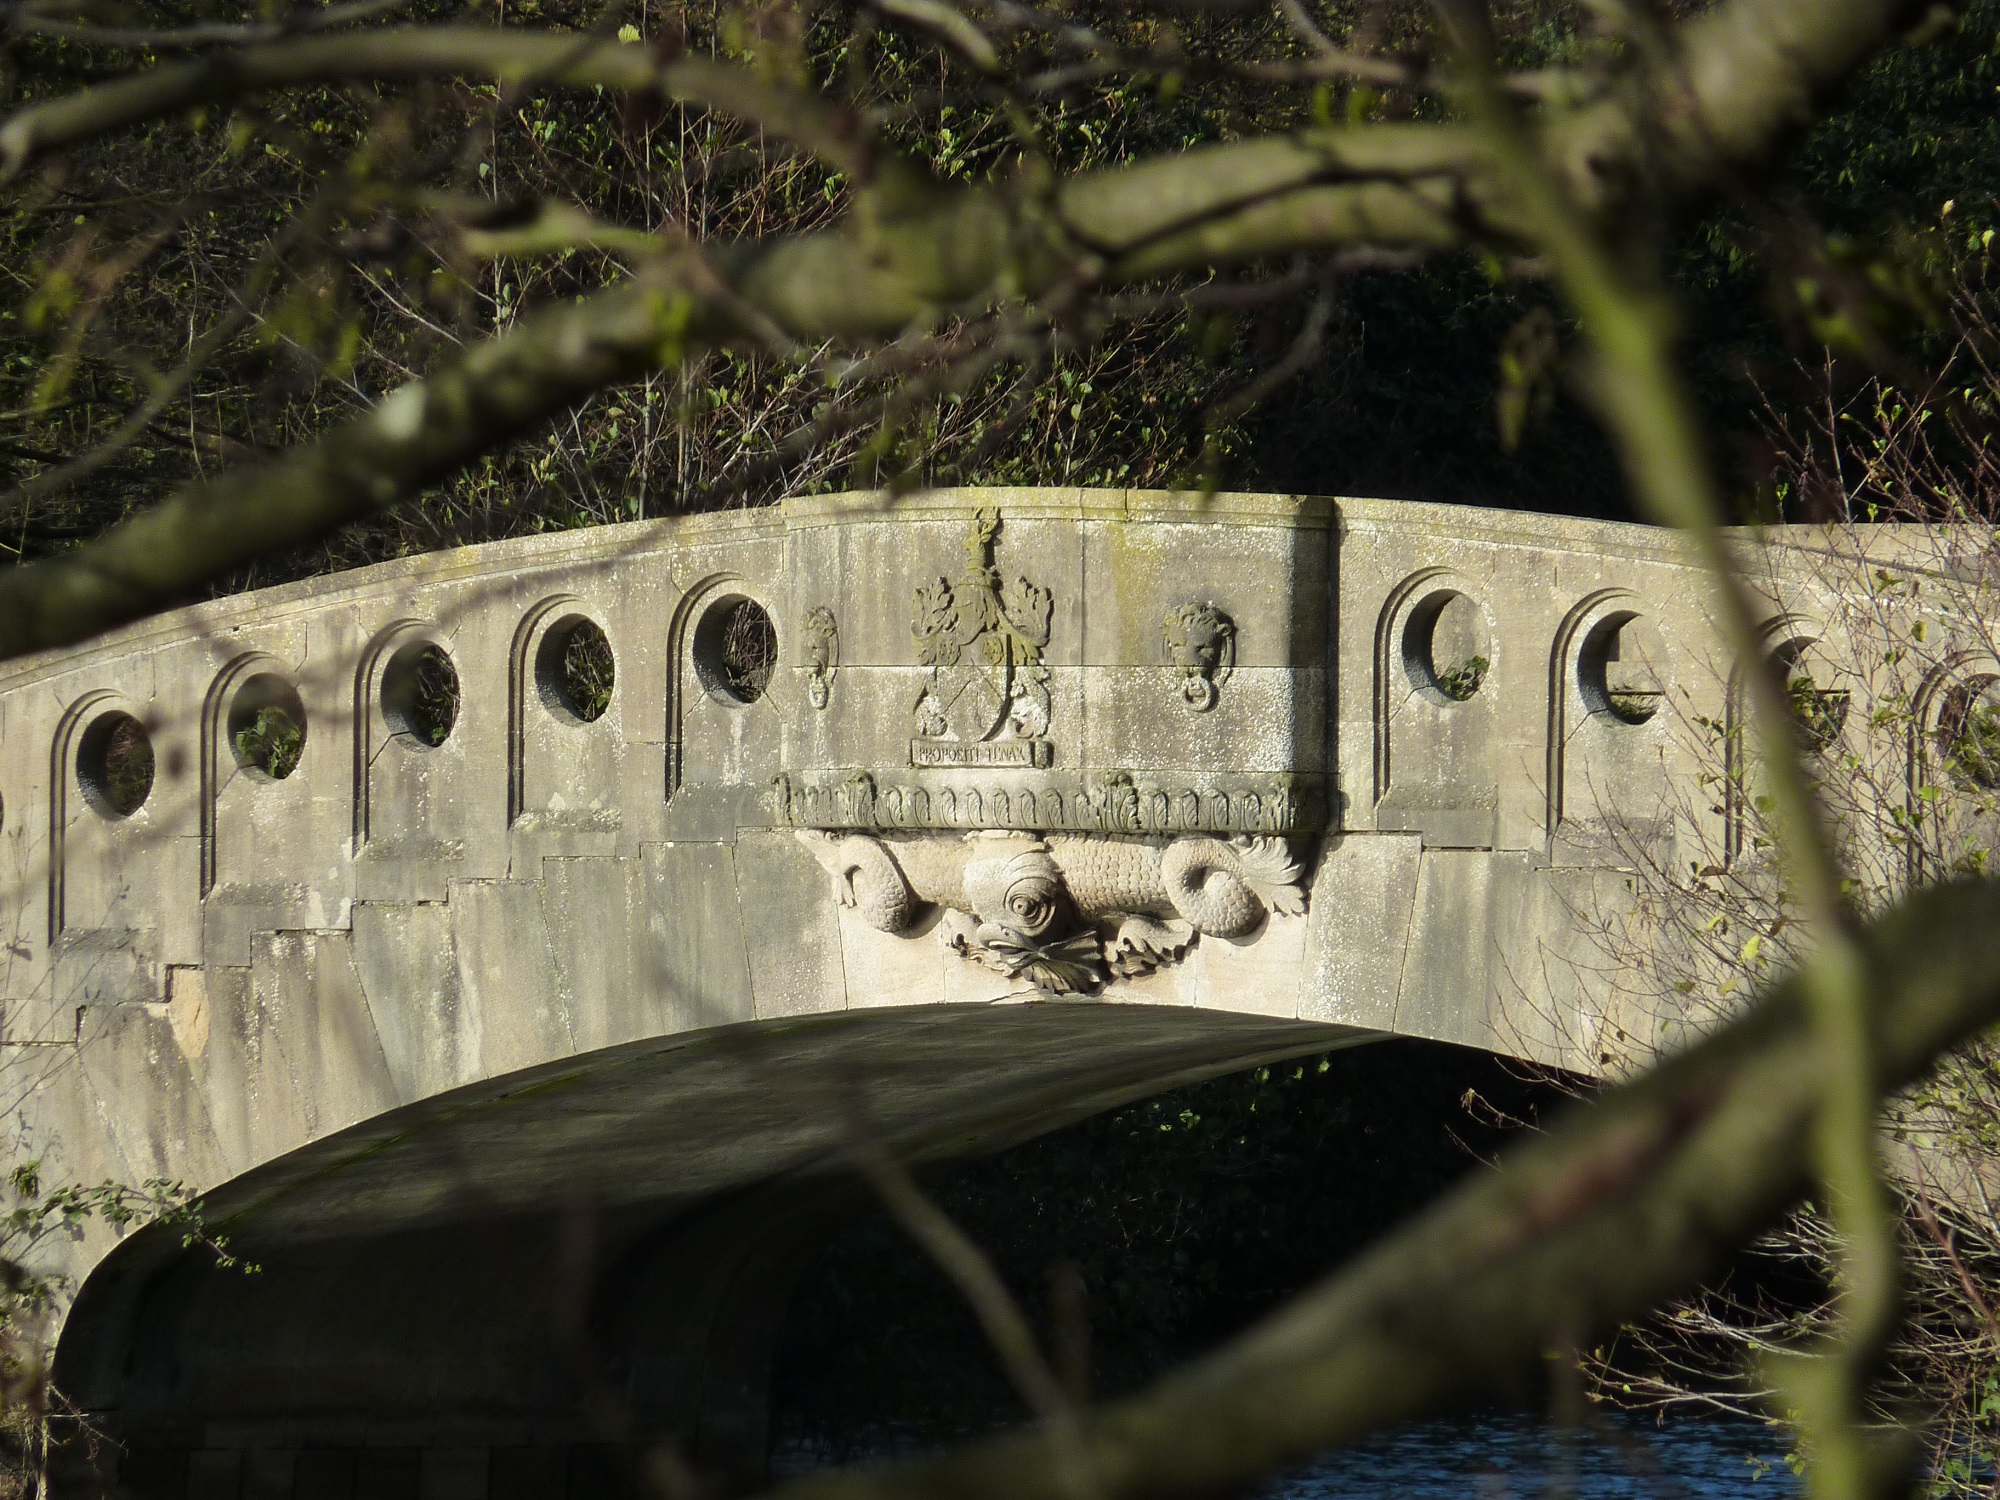 A stone bridge with ornamental carvings.